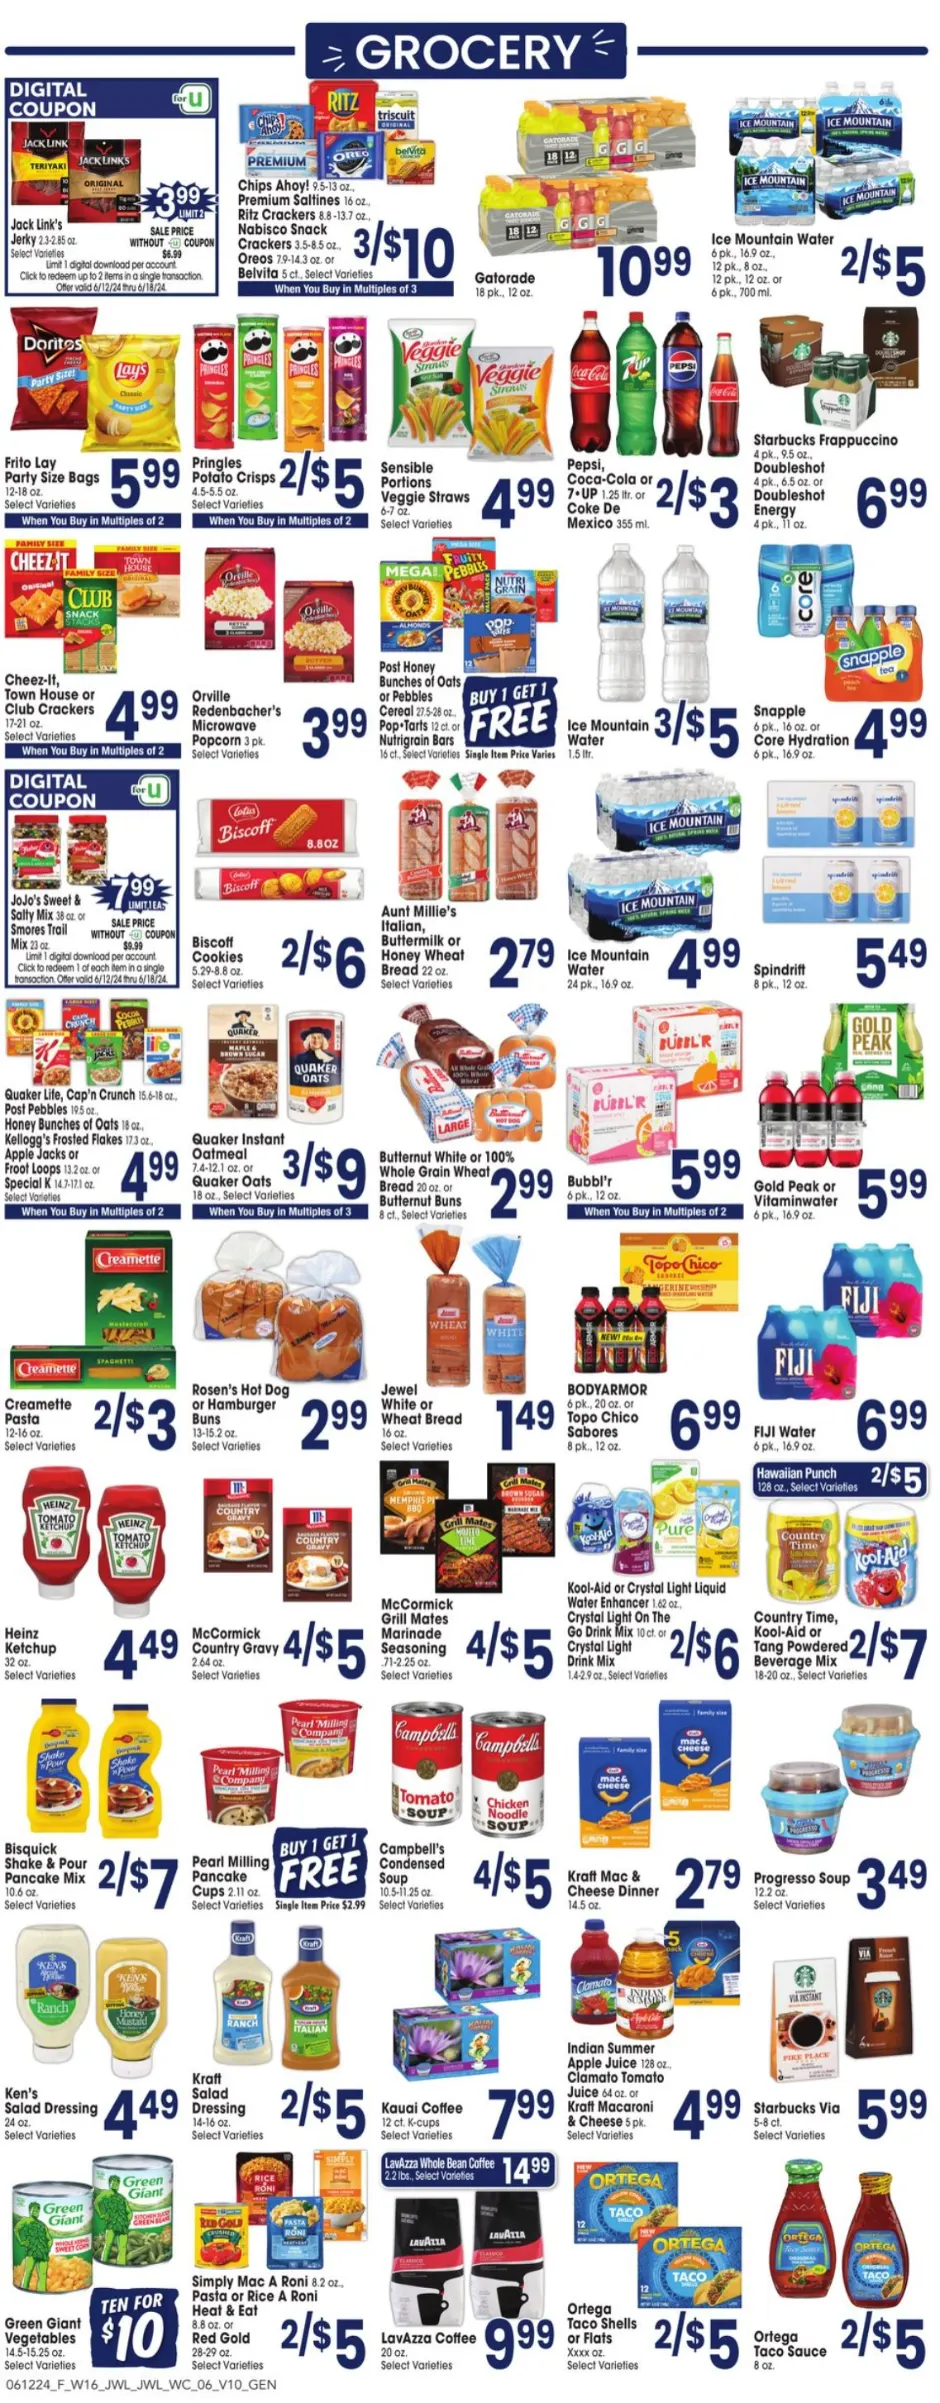 Jewel Osco Weekly Ad July 2024 Weekly Sales, Deals, Discounts and Digital Coupons.